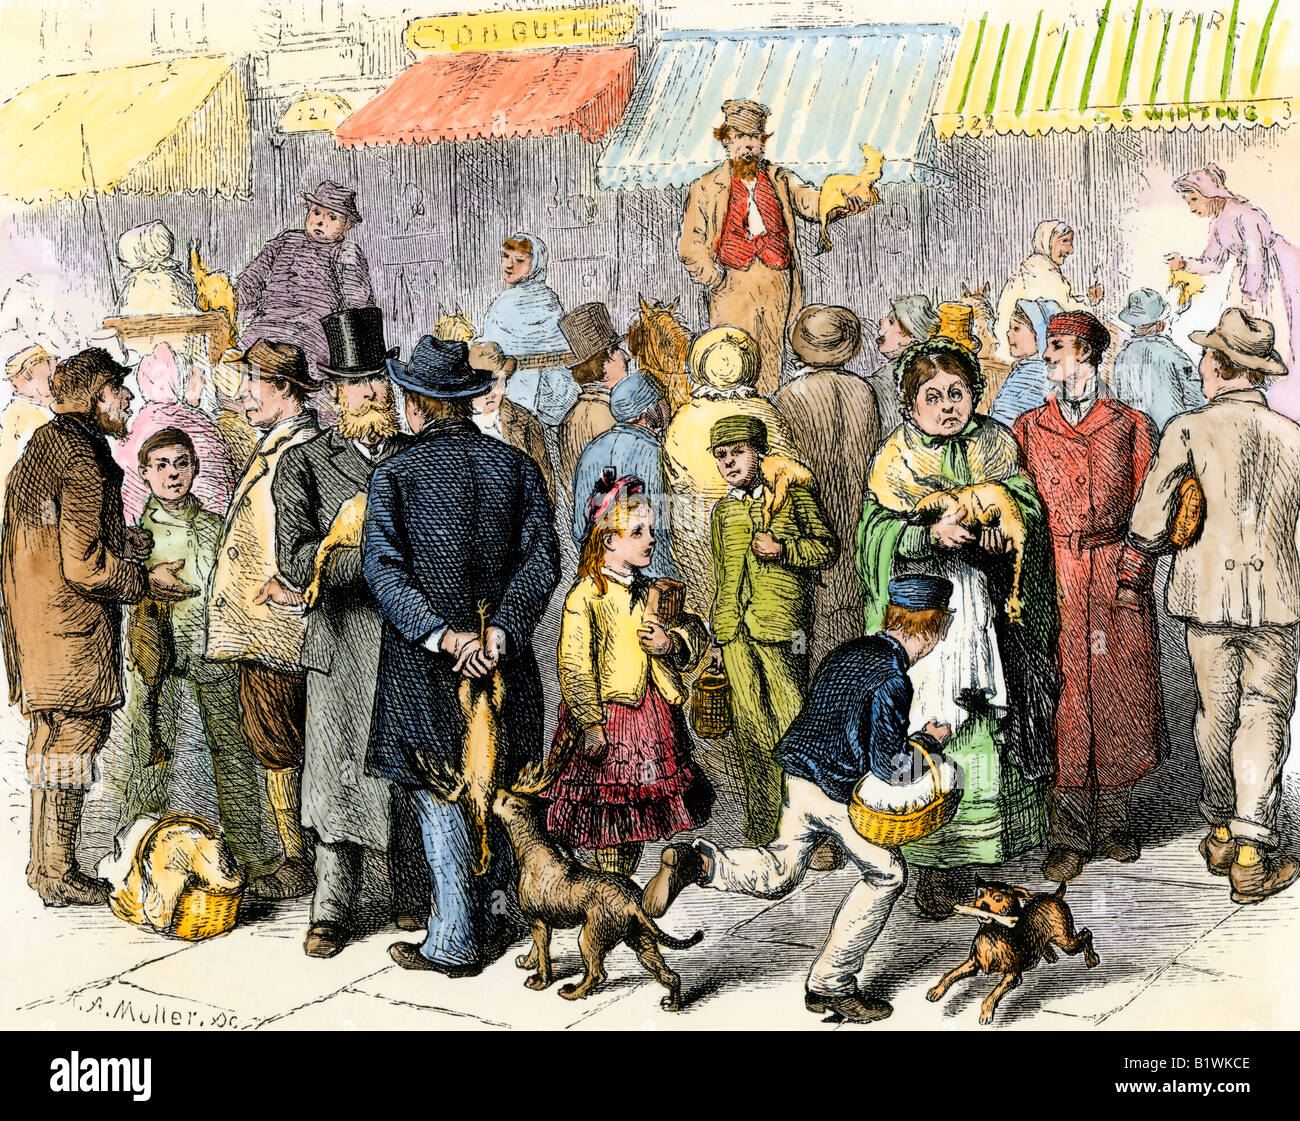 Open air market at Statehouse Square on the day before Thanksgiving in Hartford Connecticut 1870s. Hand-colored woodcut Stock Photo